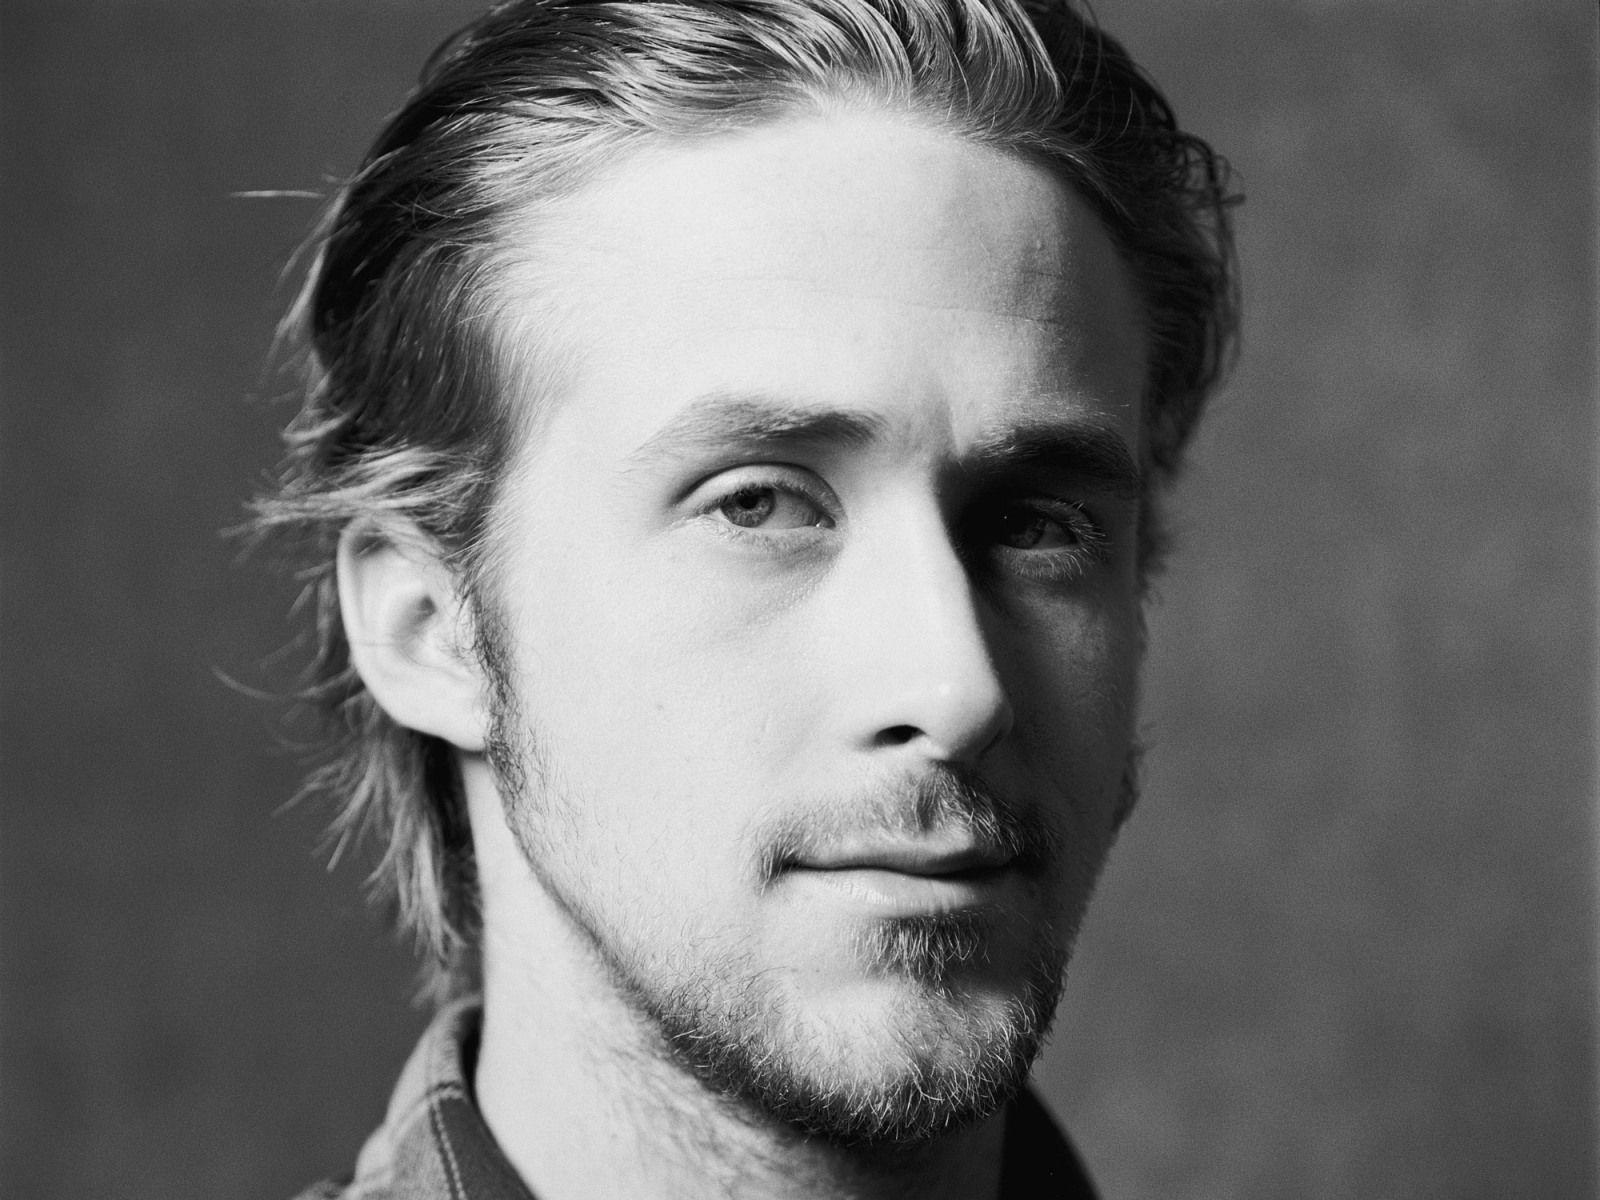 Ryan Gosling Young HD Wallpaper, Background Image